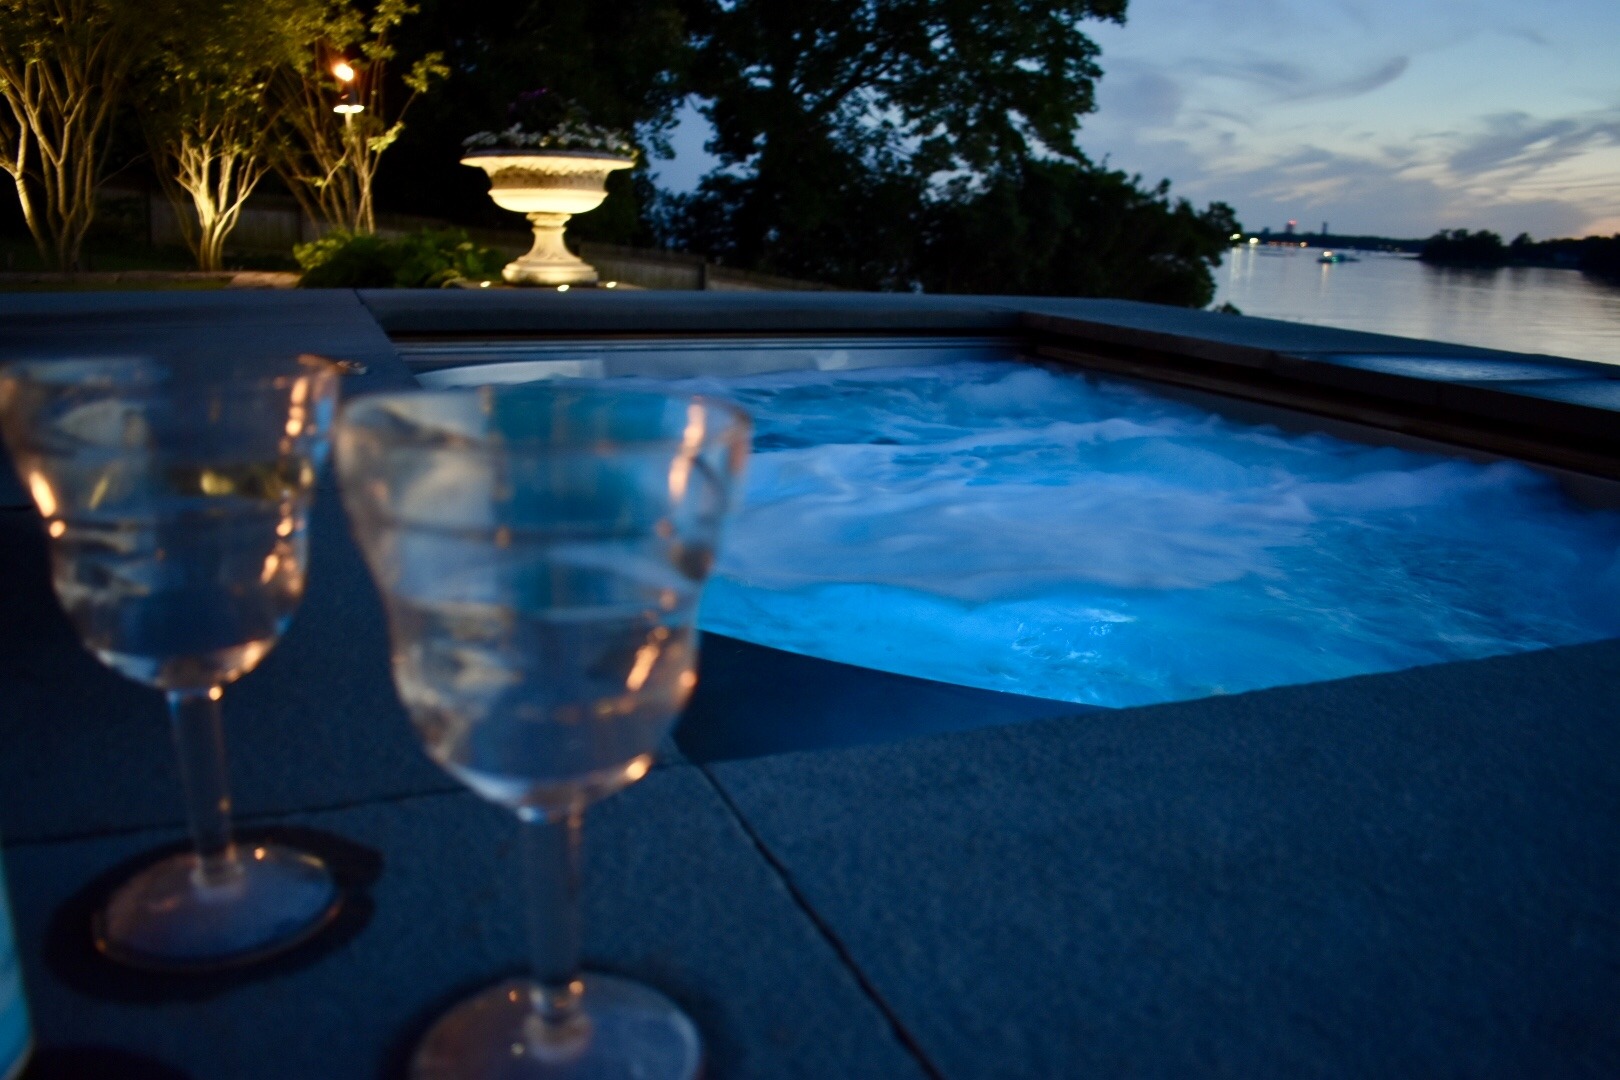 Two wine glasses sit on a surface next to a hot tub with glowing blue water. Evening setting, trees and a river visible in the background.